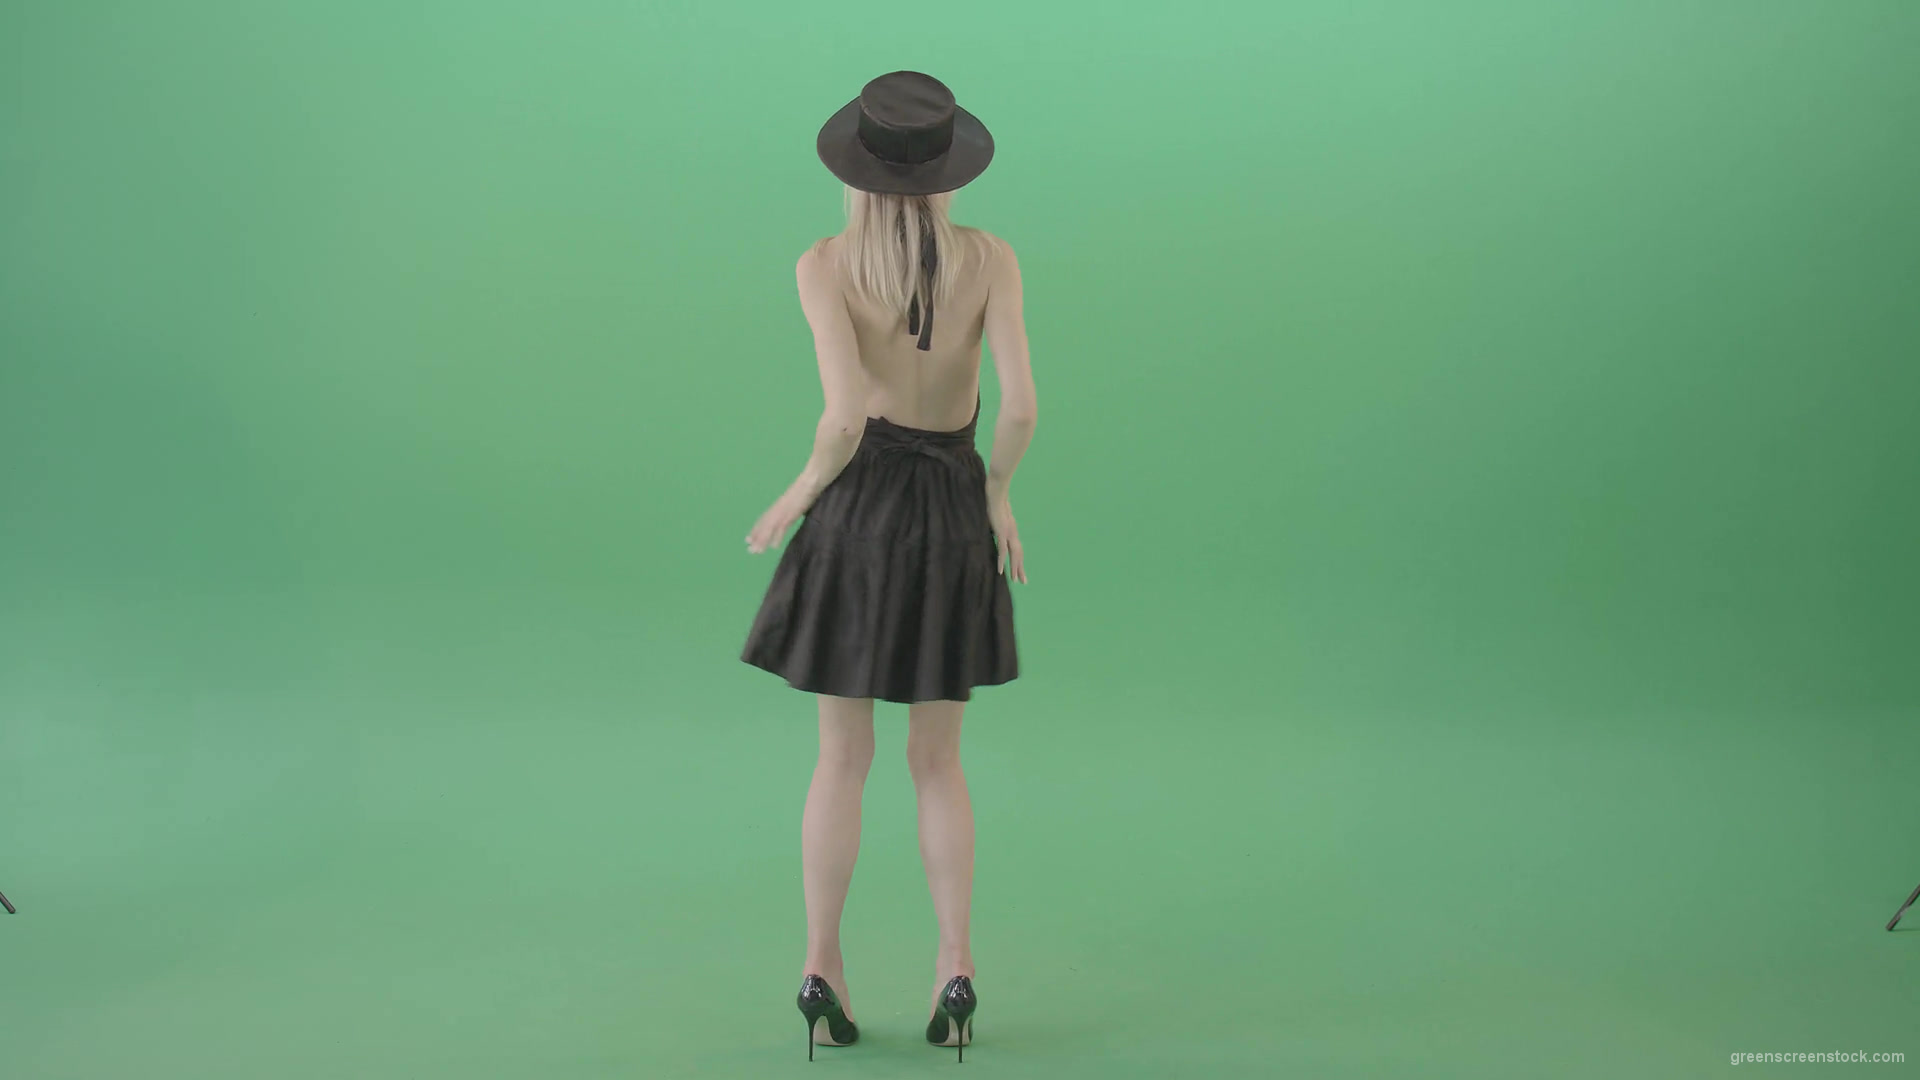 Sexy-blonde-girl-dancing-in-black-fashion-wear-dress-isolated-on-chromakey-Green-Screen-Video-Footage-1920_007 Green Screen Stock